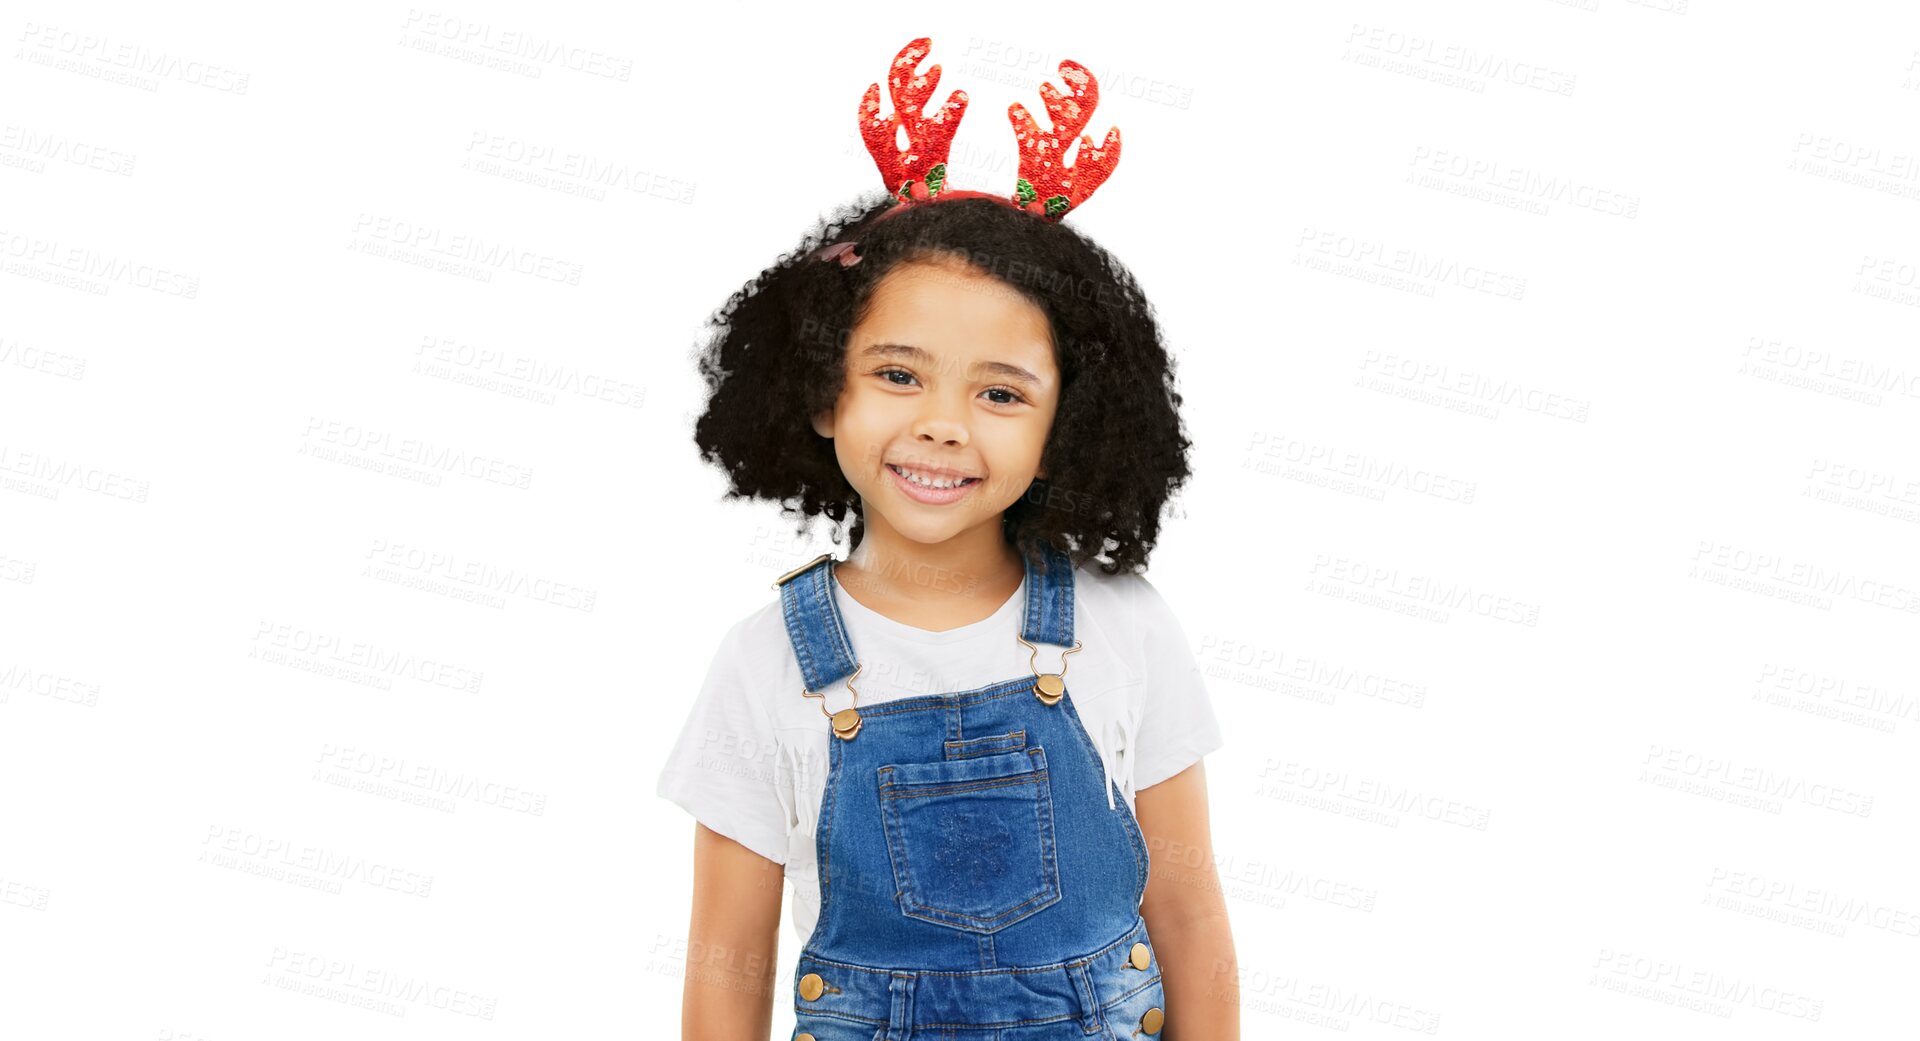 Buy stock photo Happy little girl, portrait and Christmas with antlers standing isolated on a transparent PNG background. Child or kid smile in festive feeling, youth or happiness for weekend or holiday season